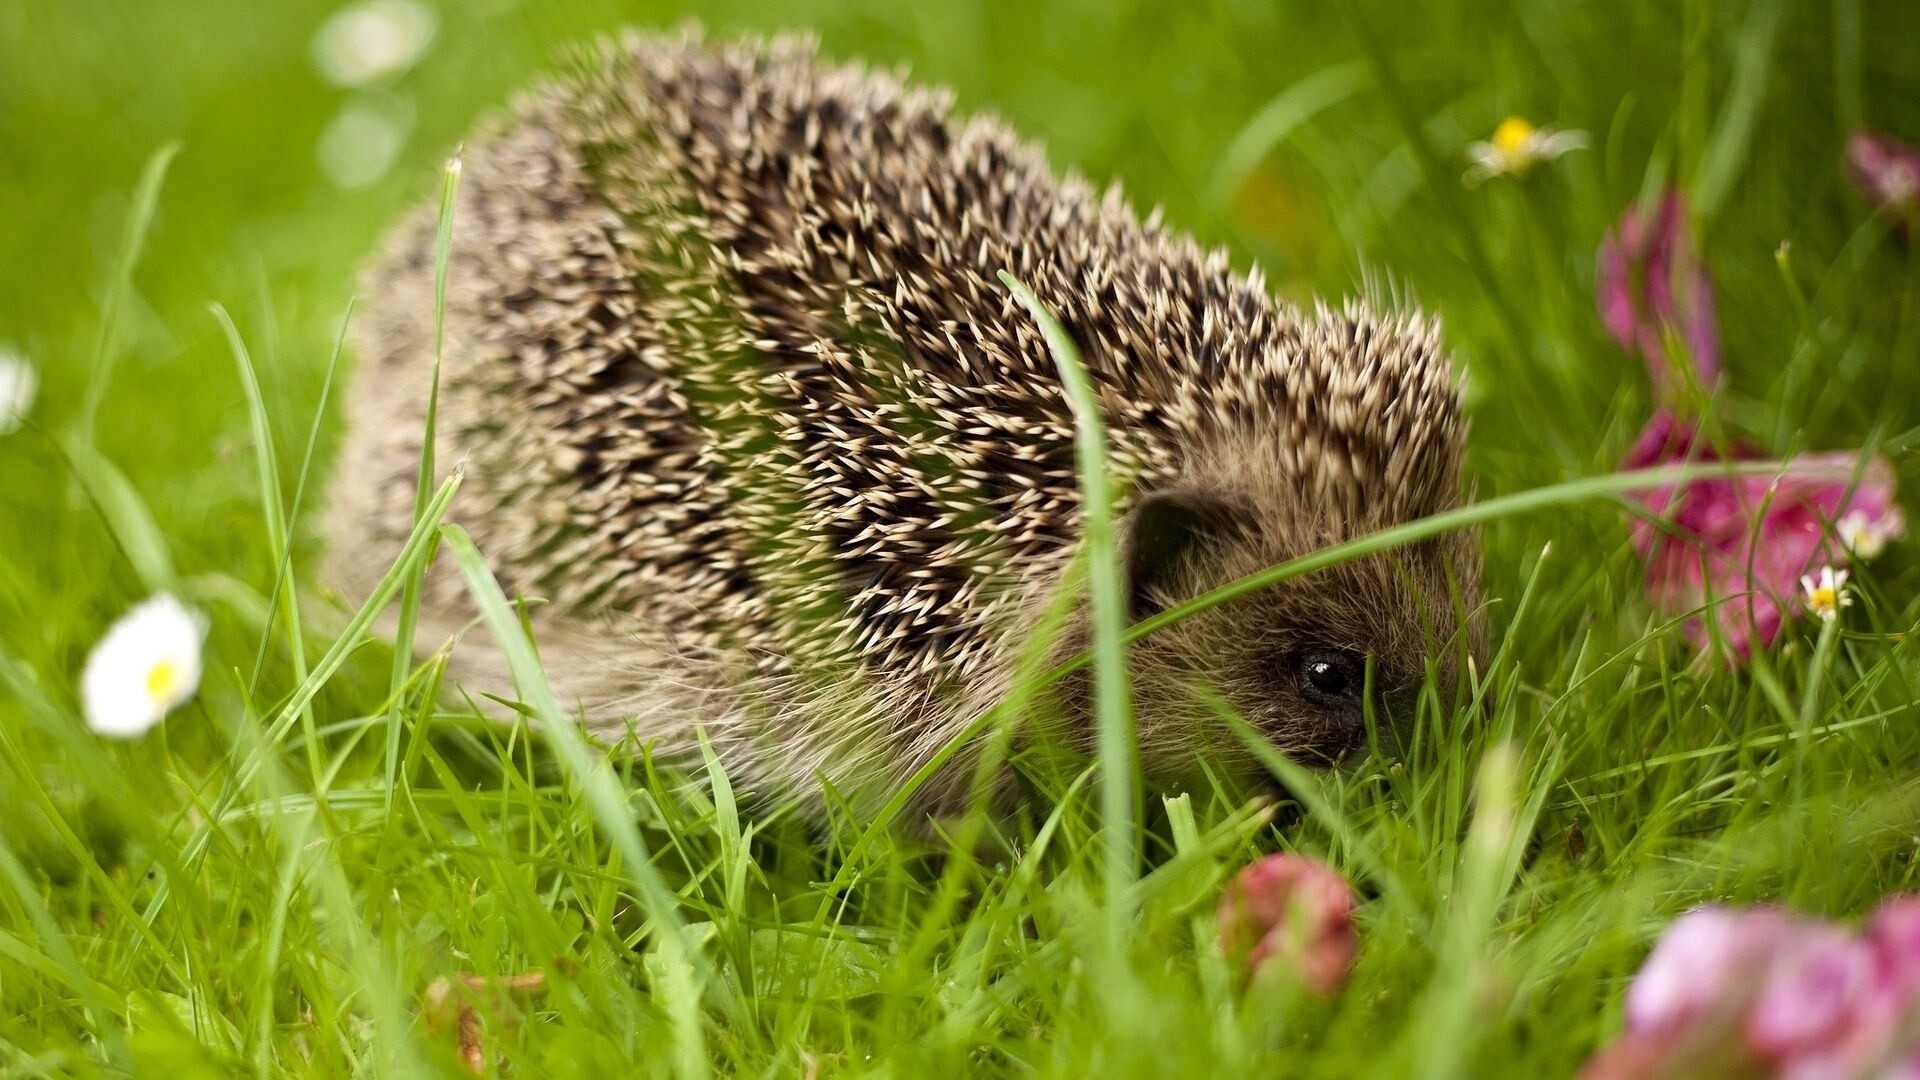 Hedgehog: Has short quills which are commonly known as spines. 1920x1080 Full HD Wallpaper.